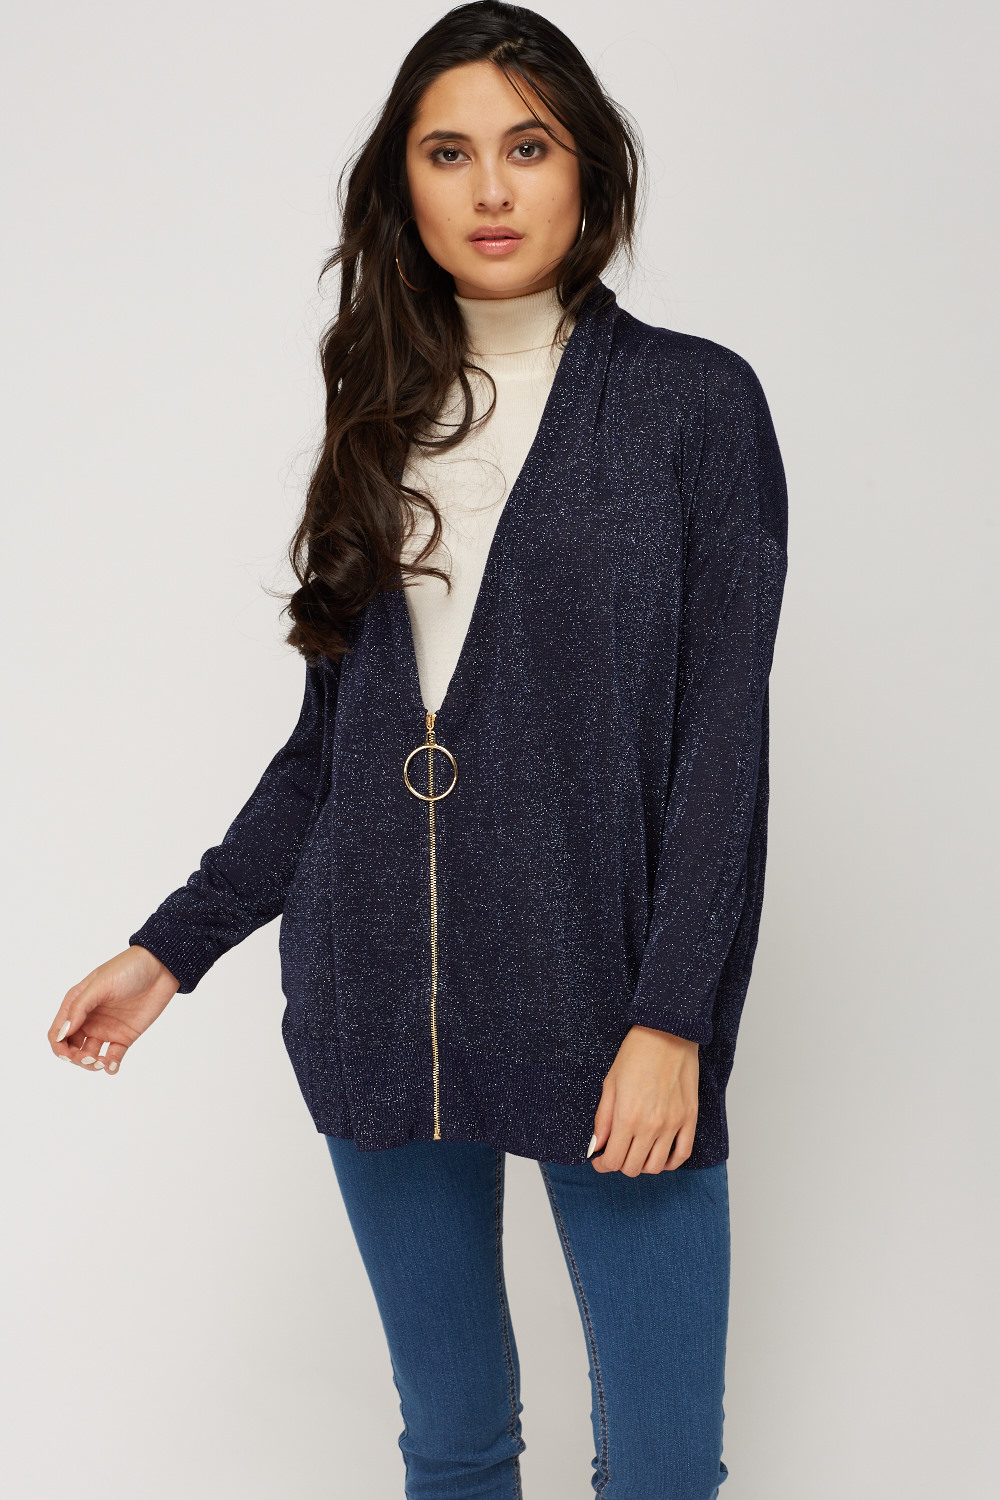 Cardigans | Buy cheap Cardigans for just £5 on Everything5pounds.com